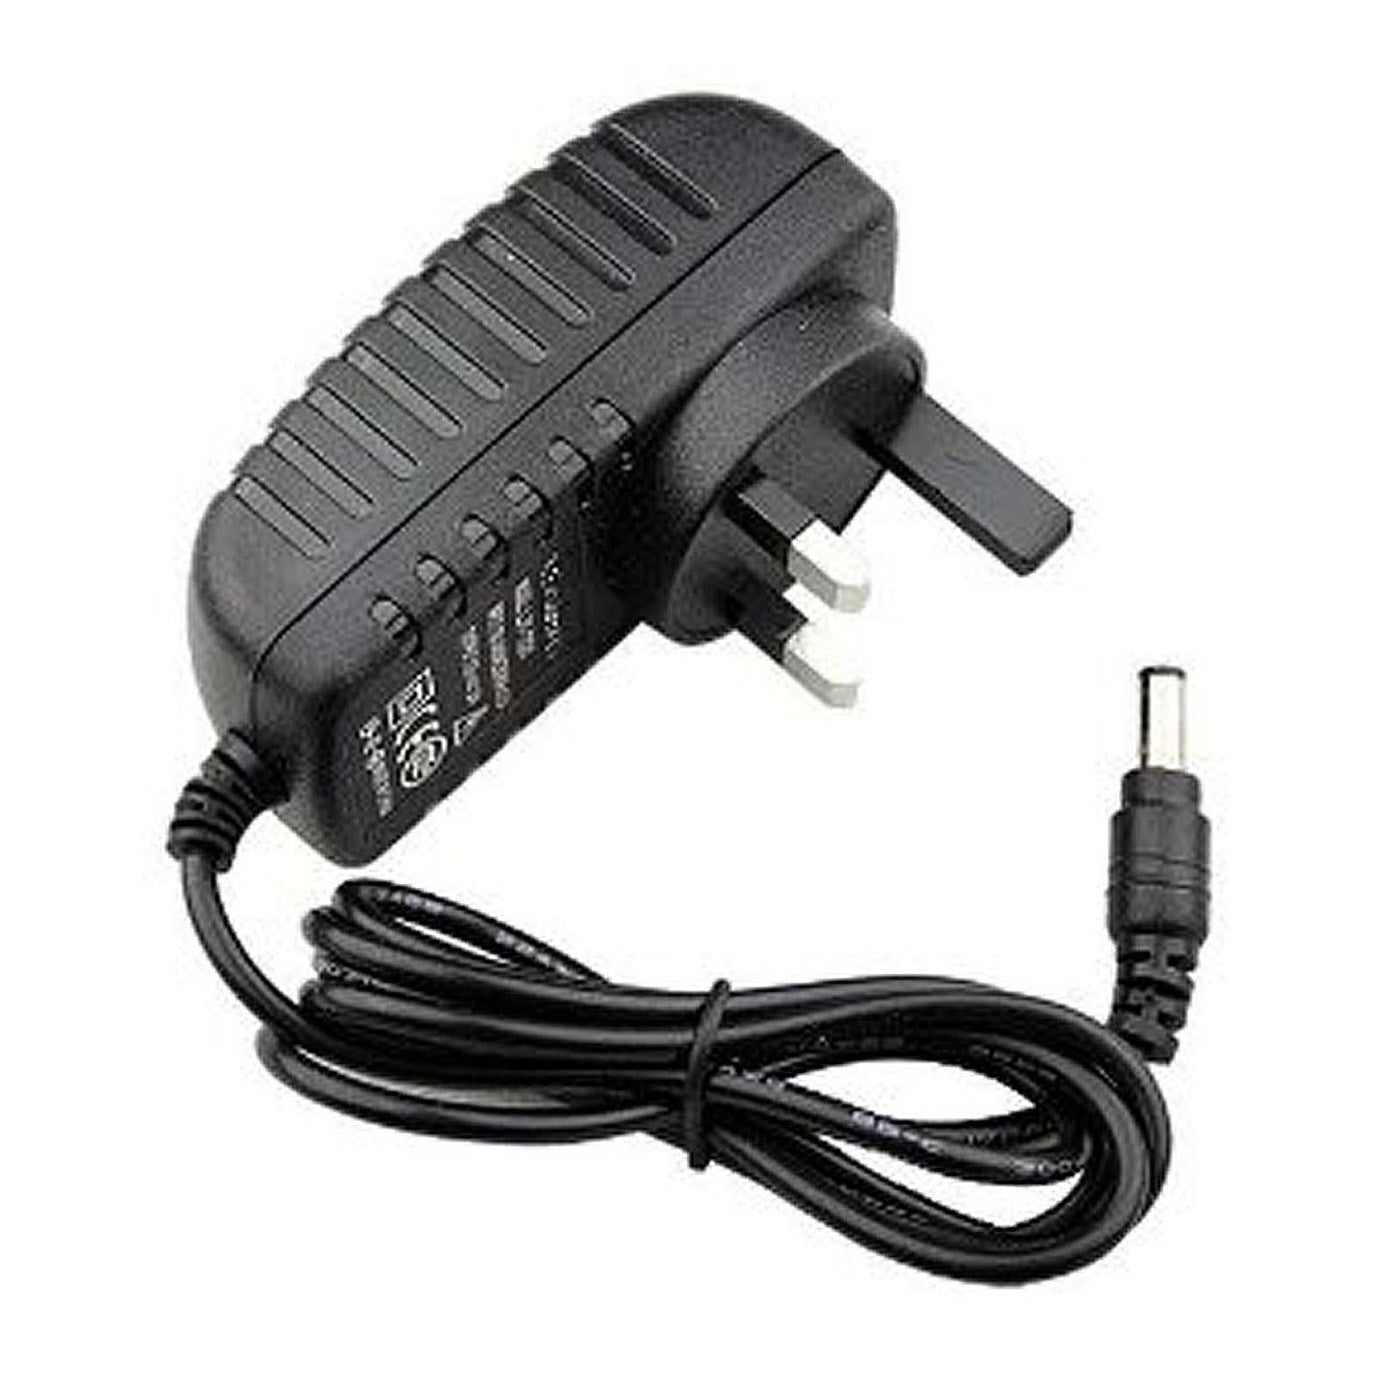 AC DC 12V 2A Power Supply Adapter Charger Transformer for 3528/5050 LED Strip